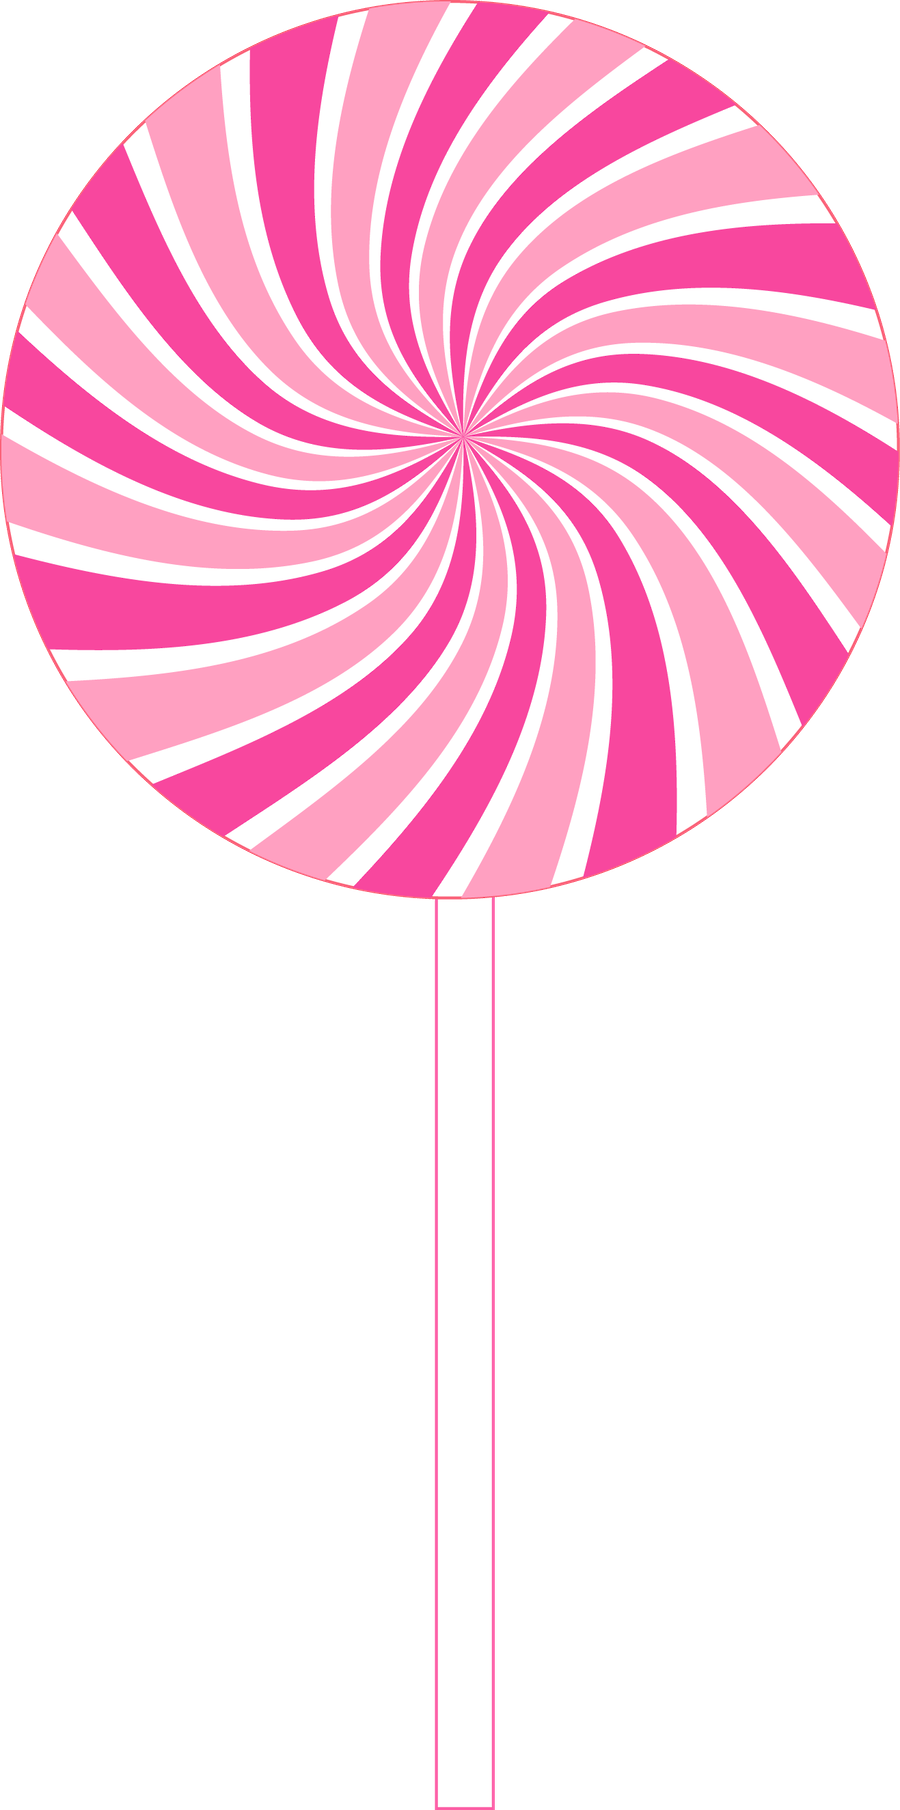 Lolly Candy Land Clip Art